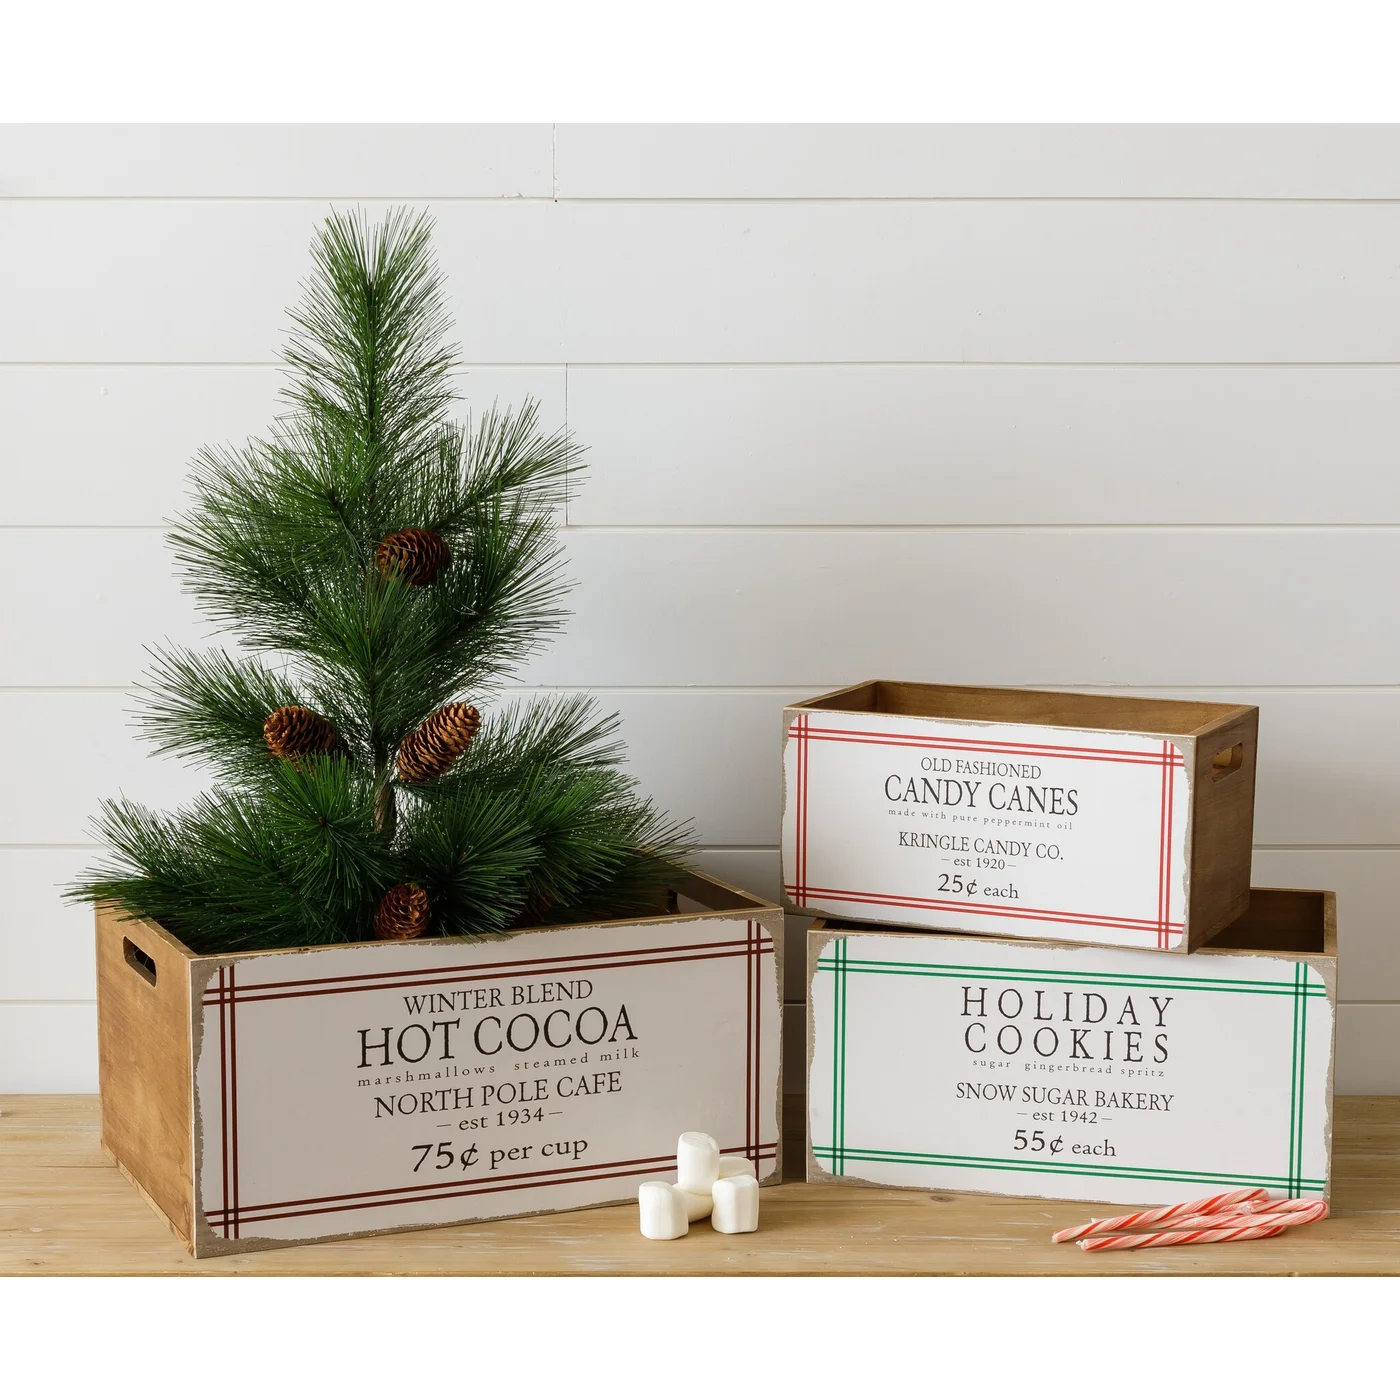 Set of 3 Christmas Crates Hot Cocoa Holiday Cookies & Candy Canes